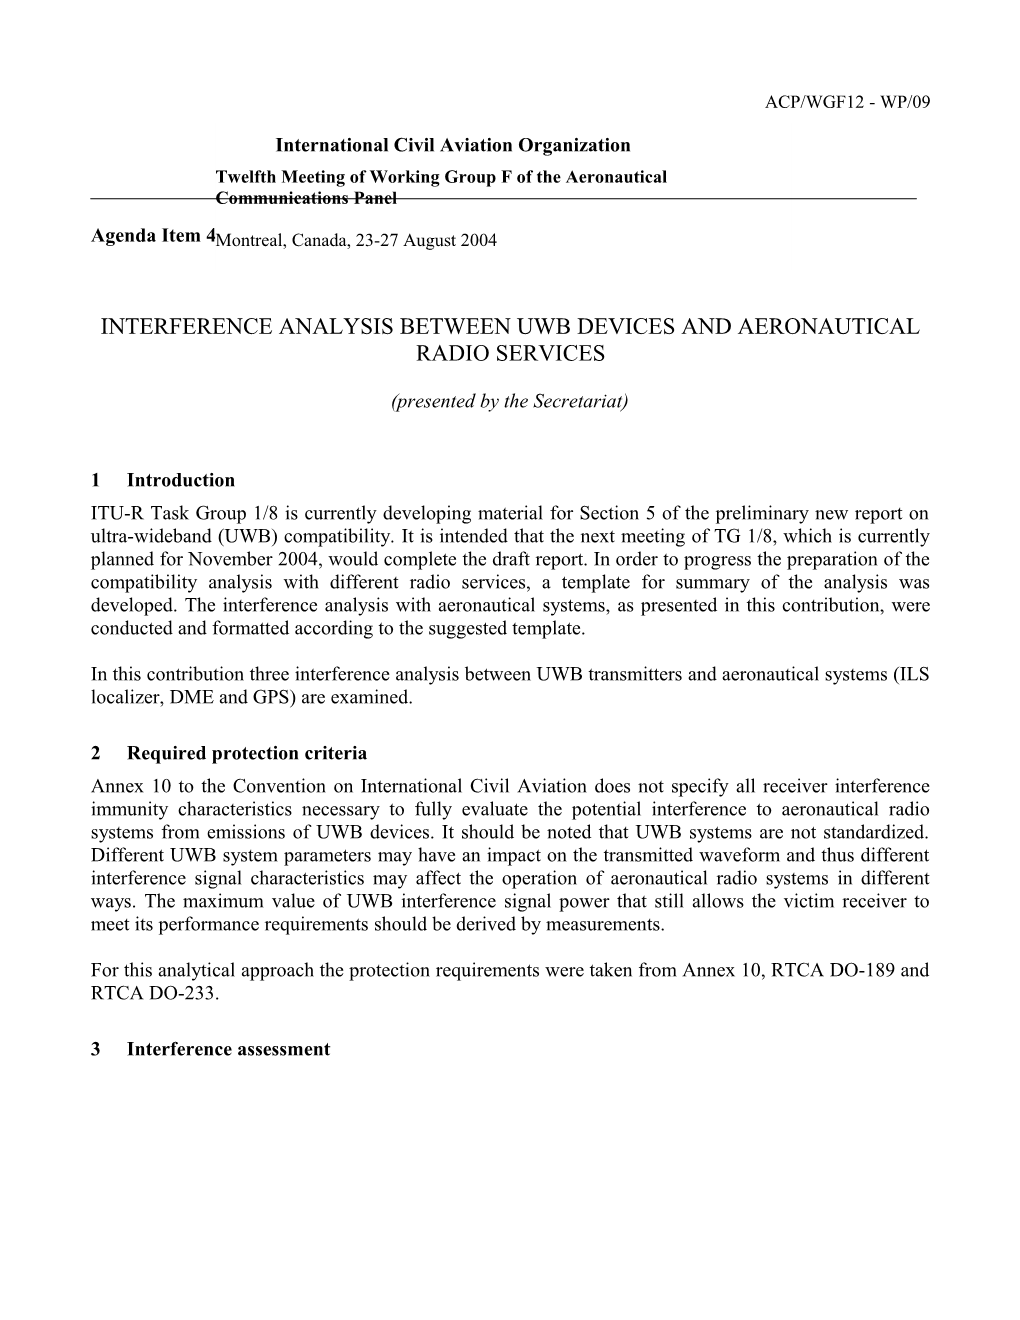 Interference Analysis Between UWB Devices and Aeronautical Radio Services